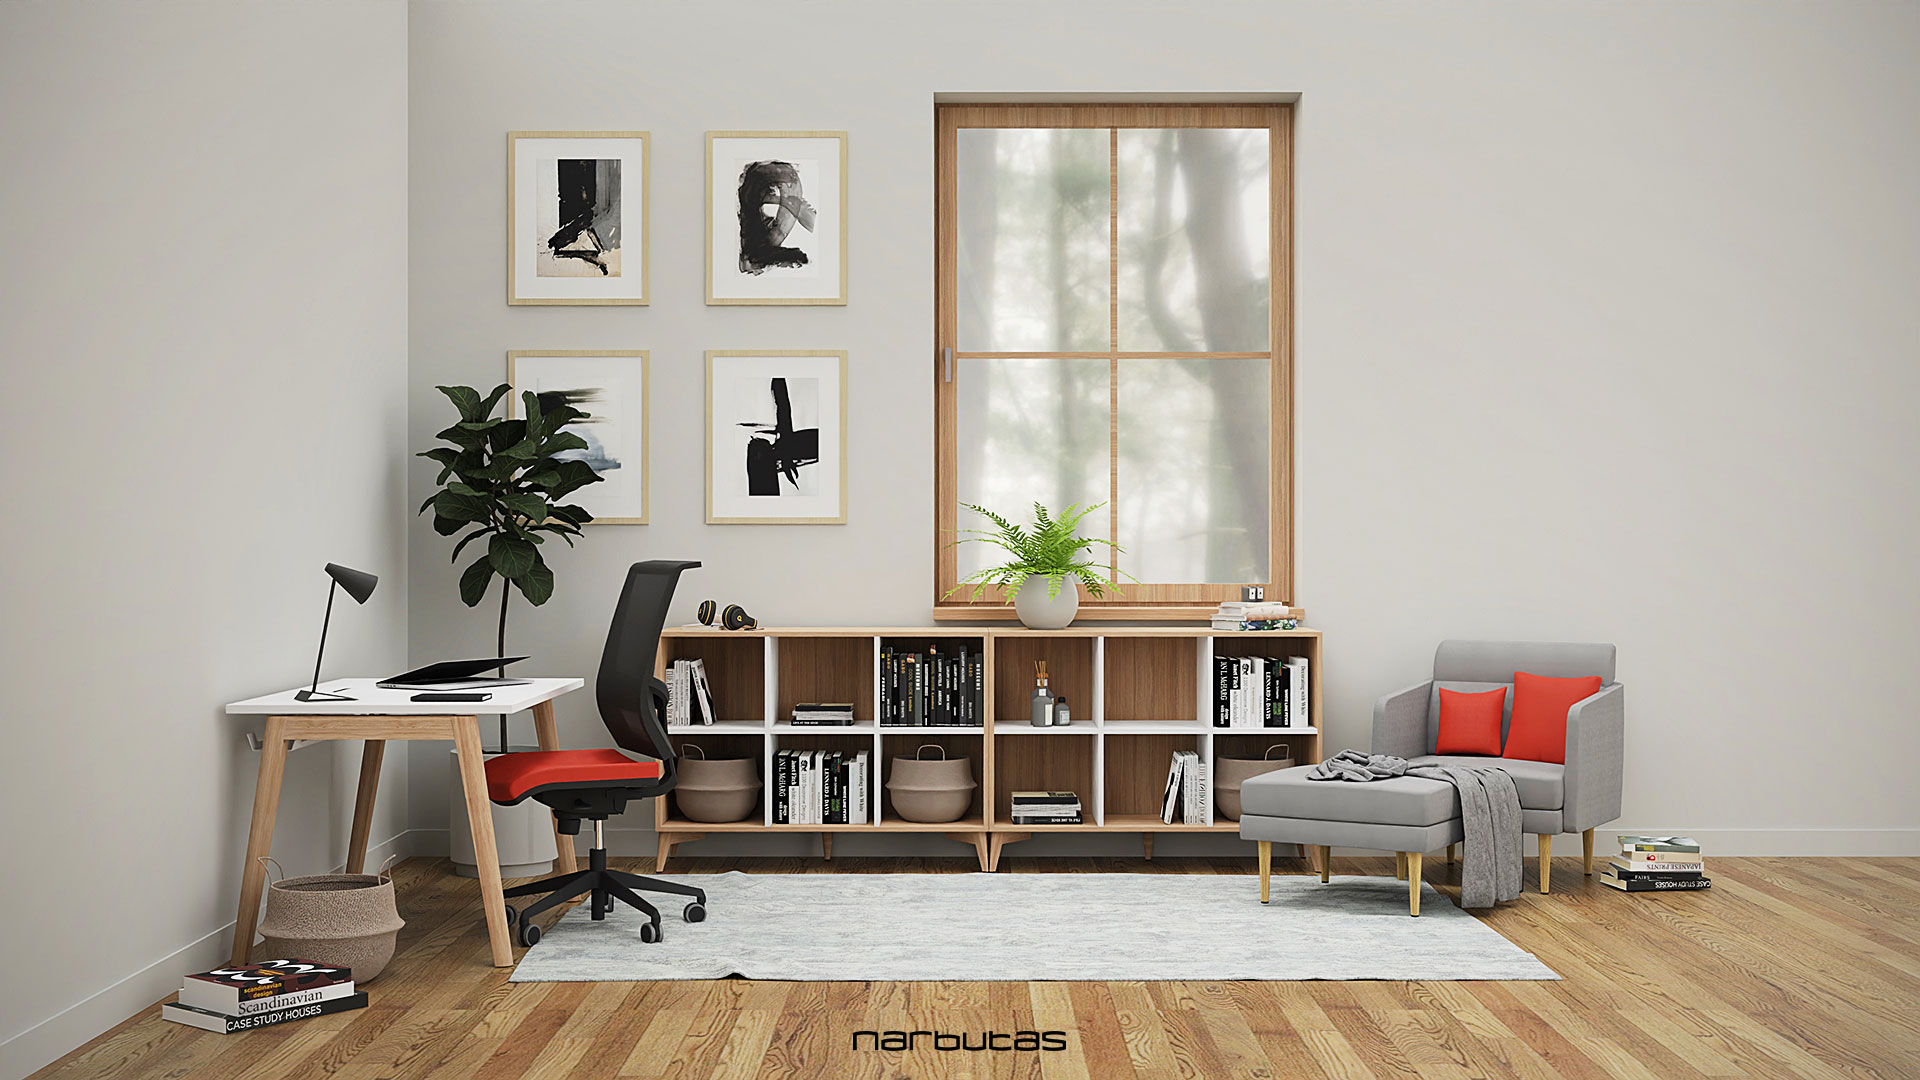 With natural ash wood legs Nova Wood looks great in your home office space